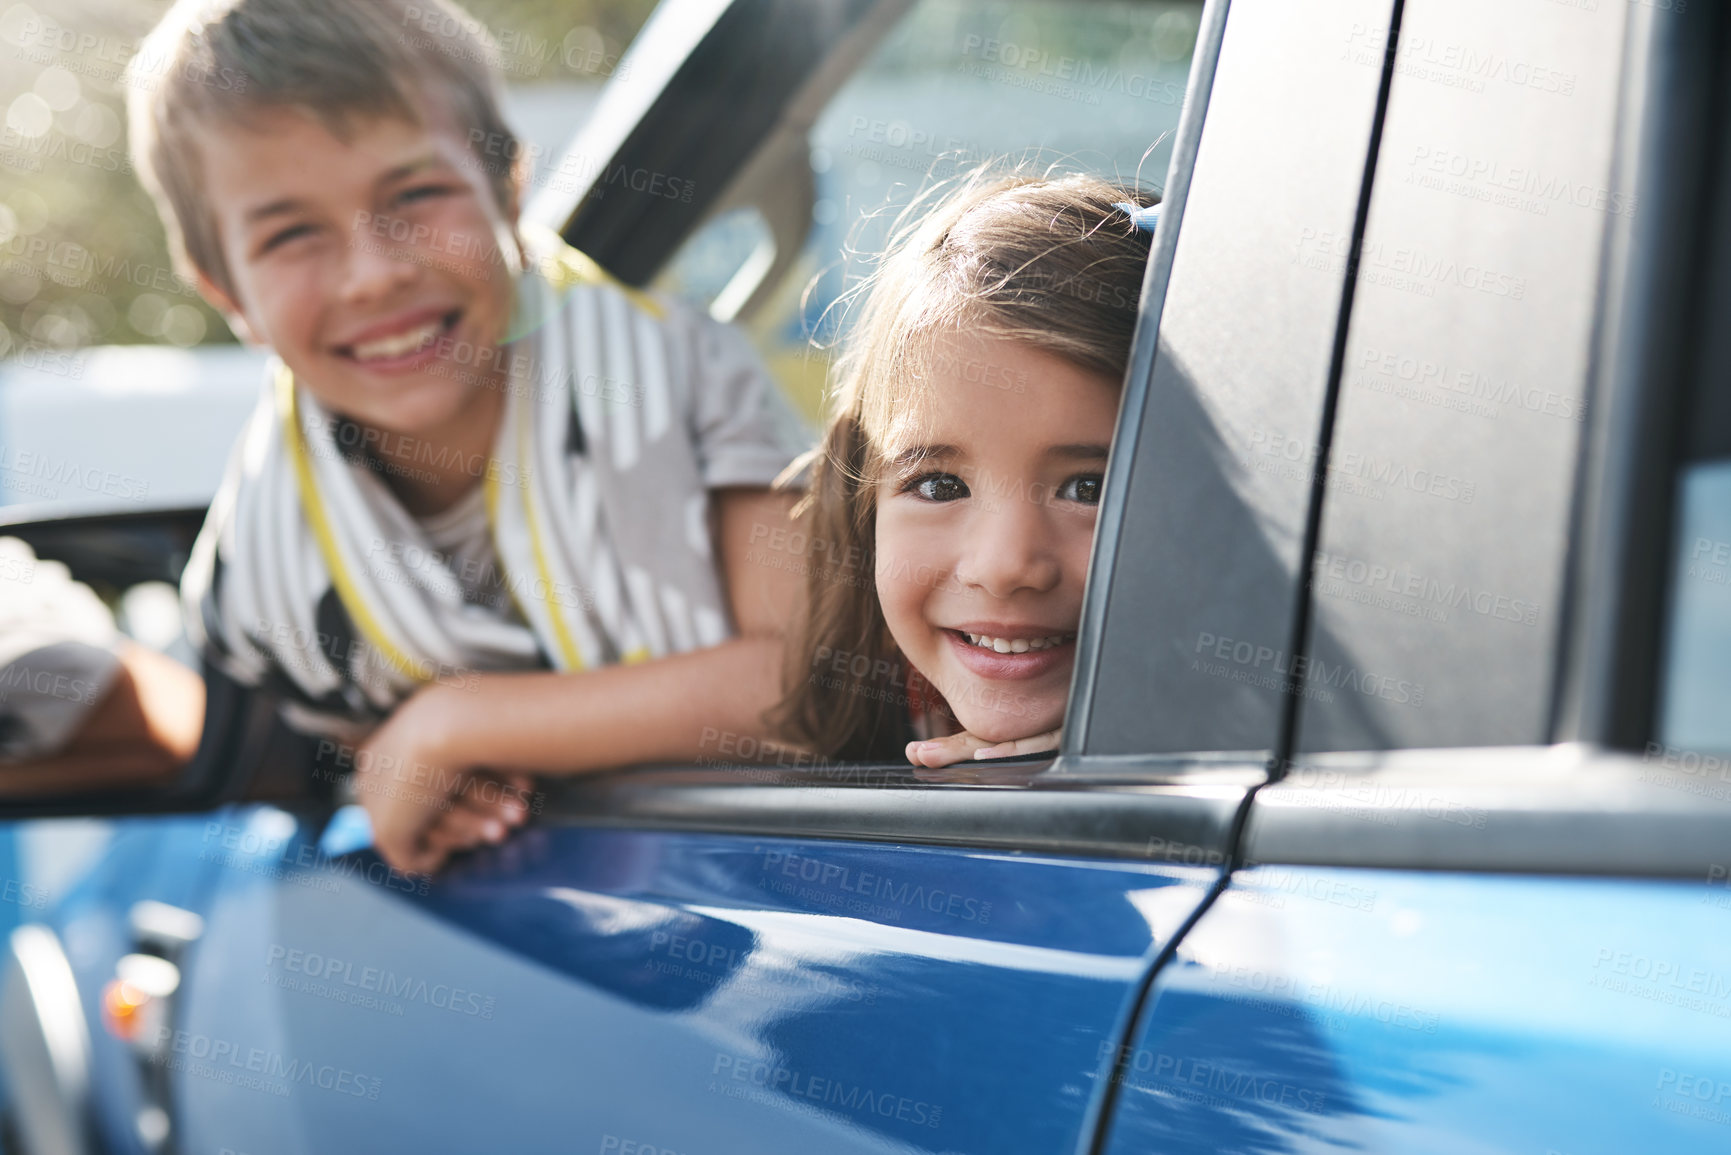 Buy stock photo Cropped portrait of two young children looking out the window of the car while waiting to go on a roadtrip